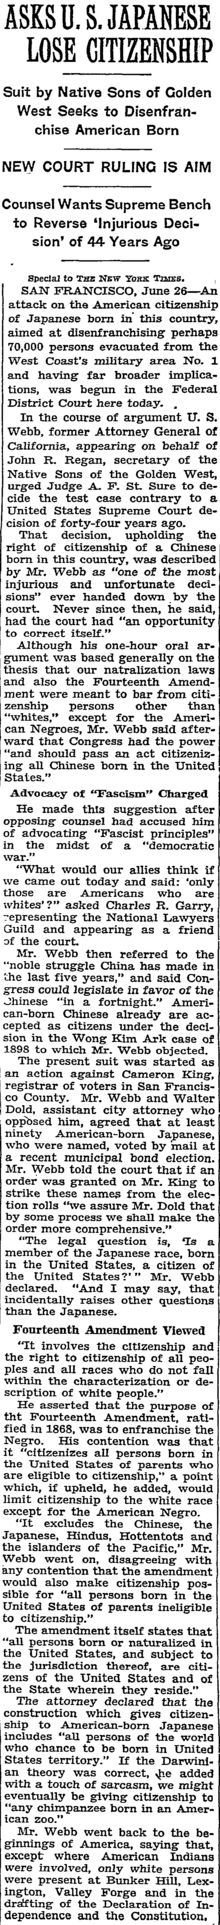 Asks US Japanese Lose Citizenship New York Times 1942-06-27.png